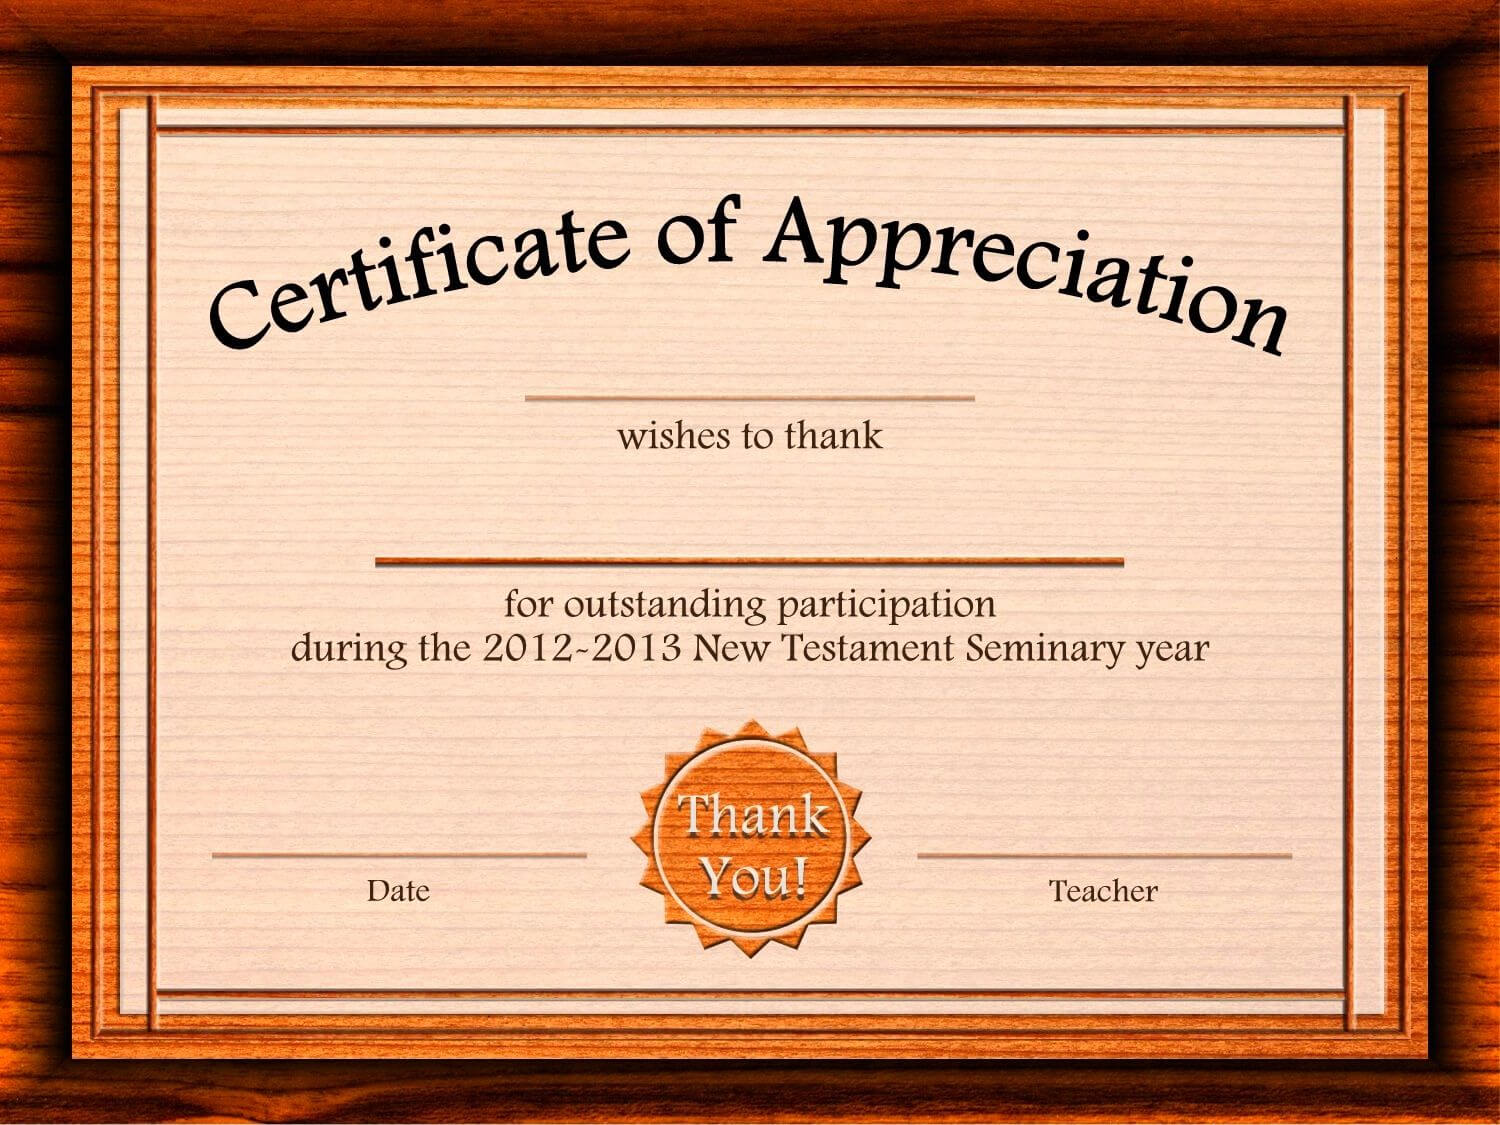 Free Appreciation Certificate Templates Supplier Contract With Best Teacher Certificate Templates Free